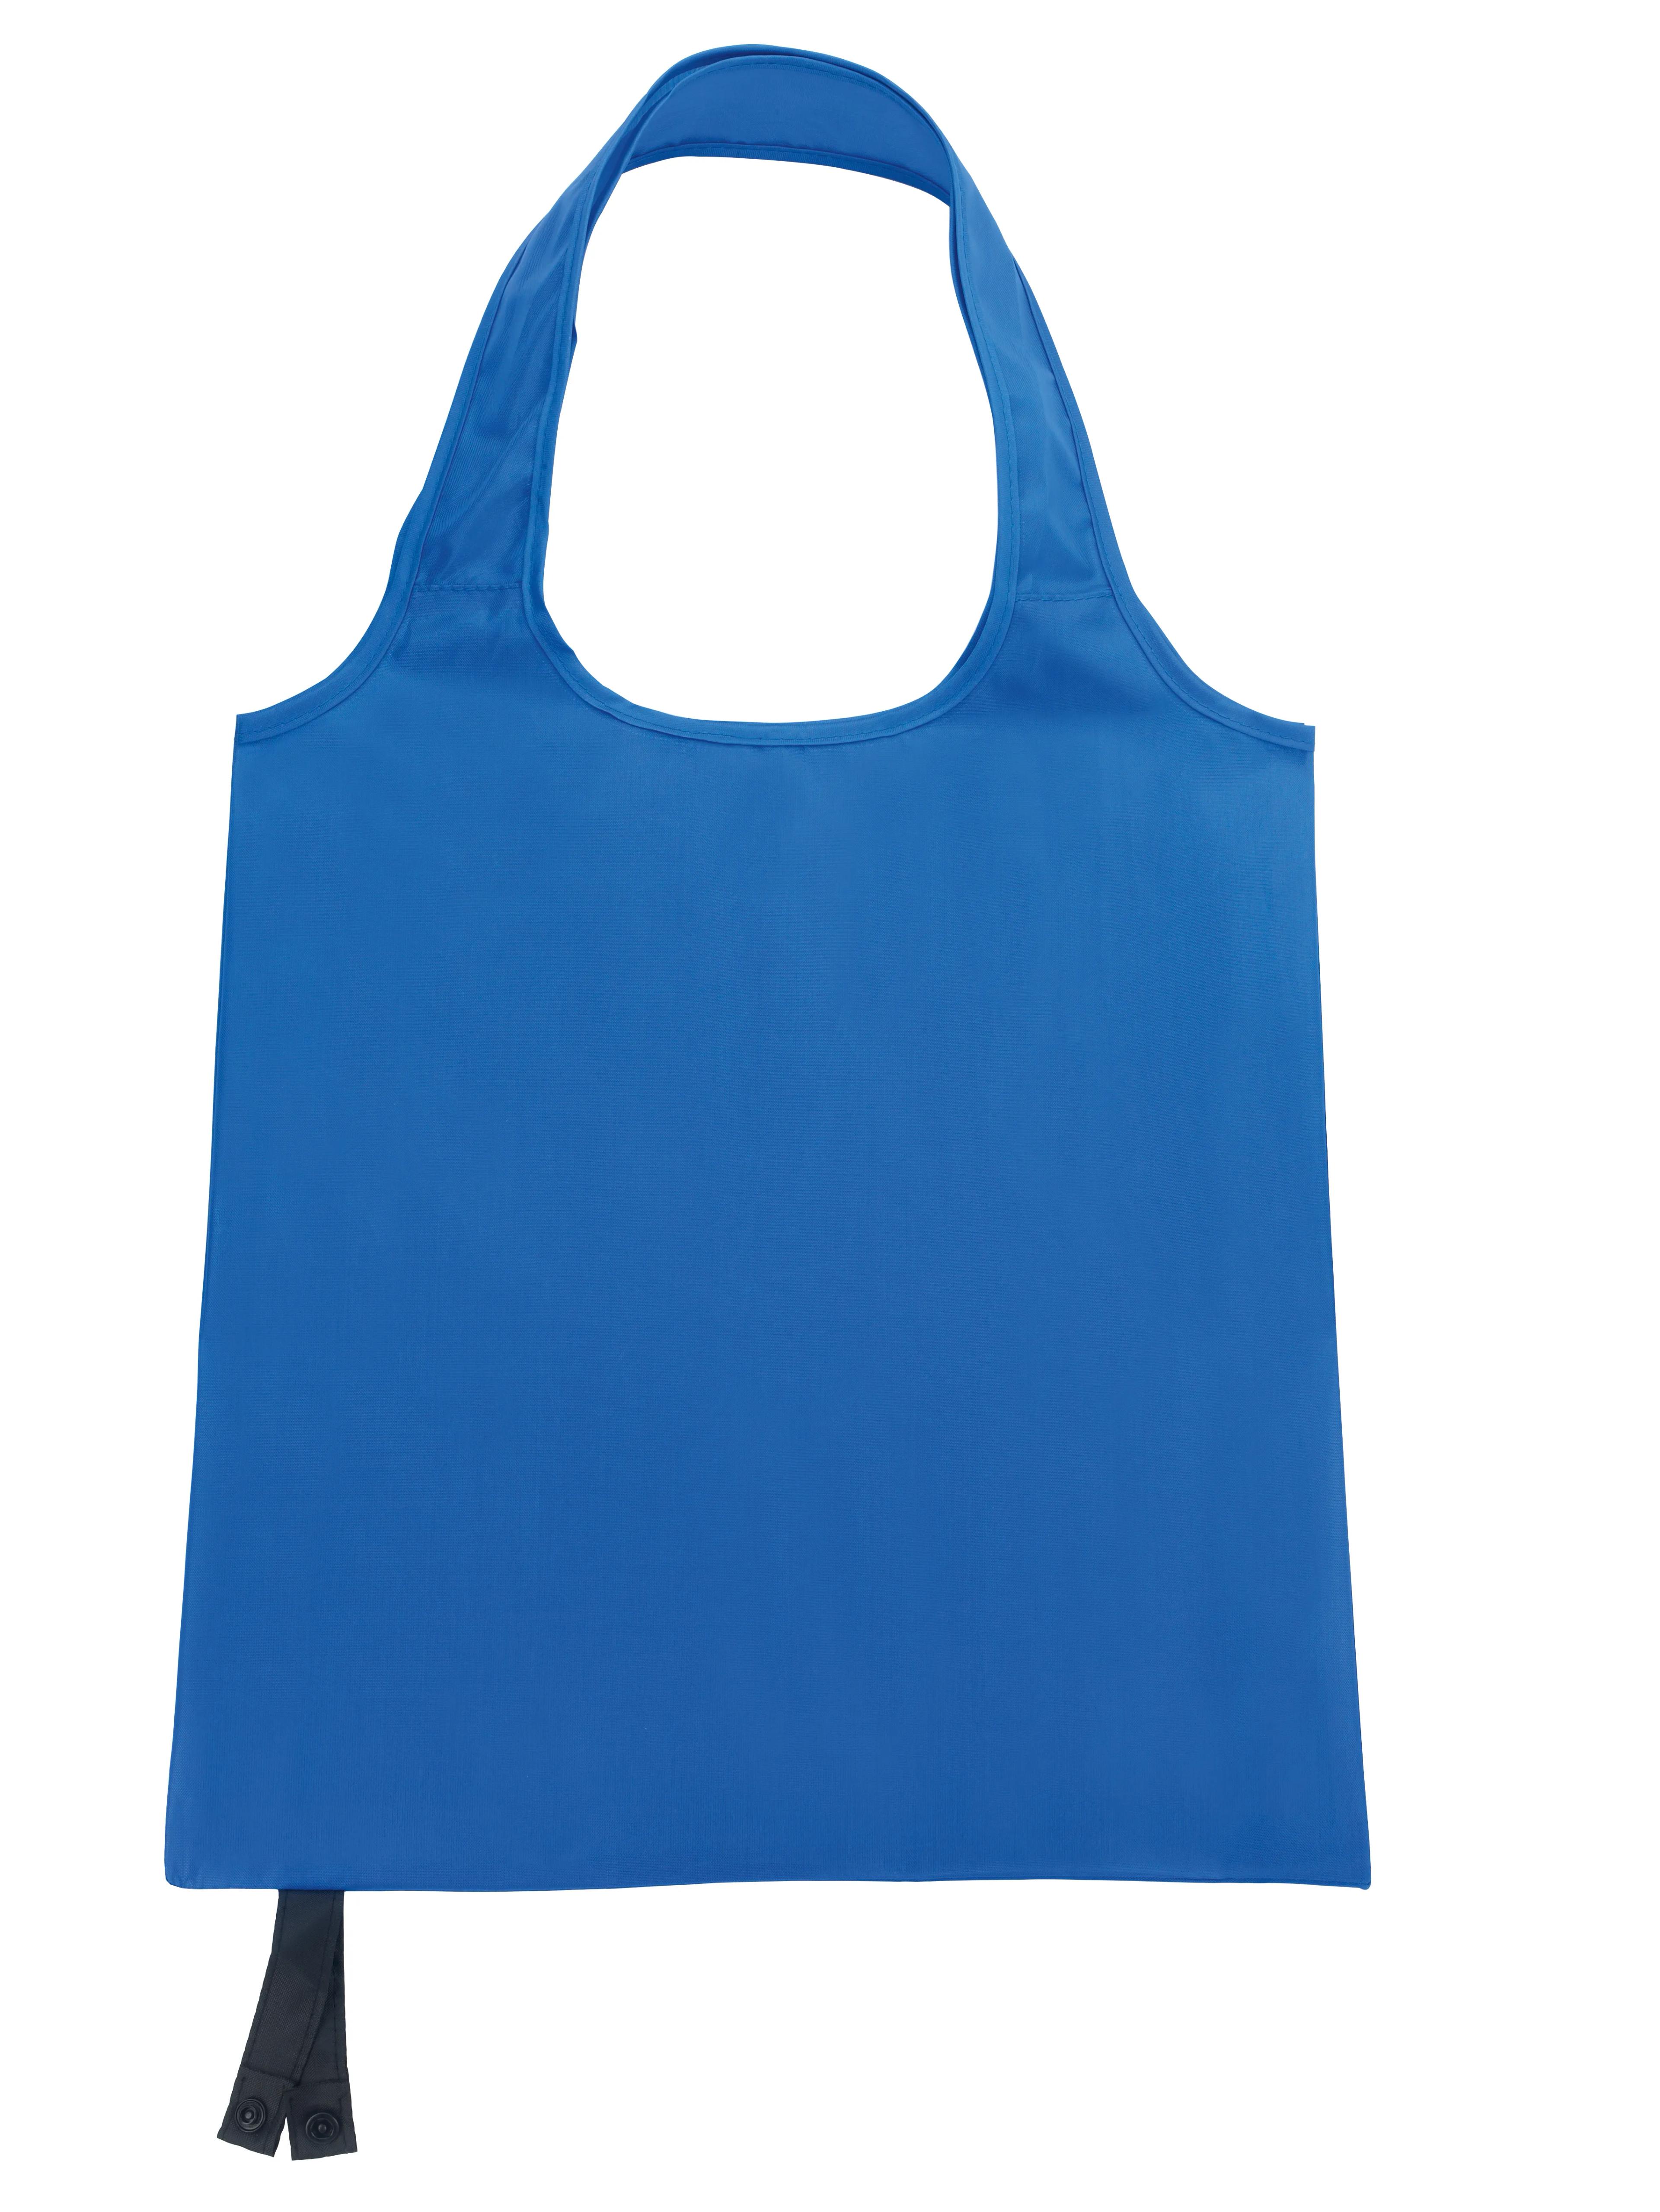 Reusable Foldable Tote 3 of 11